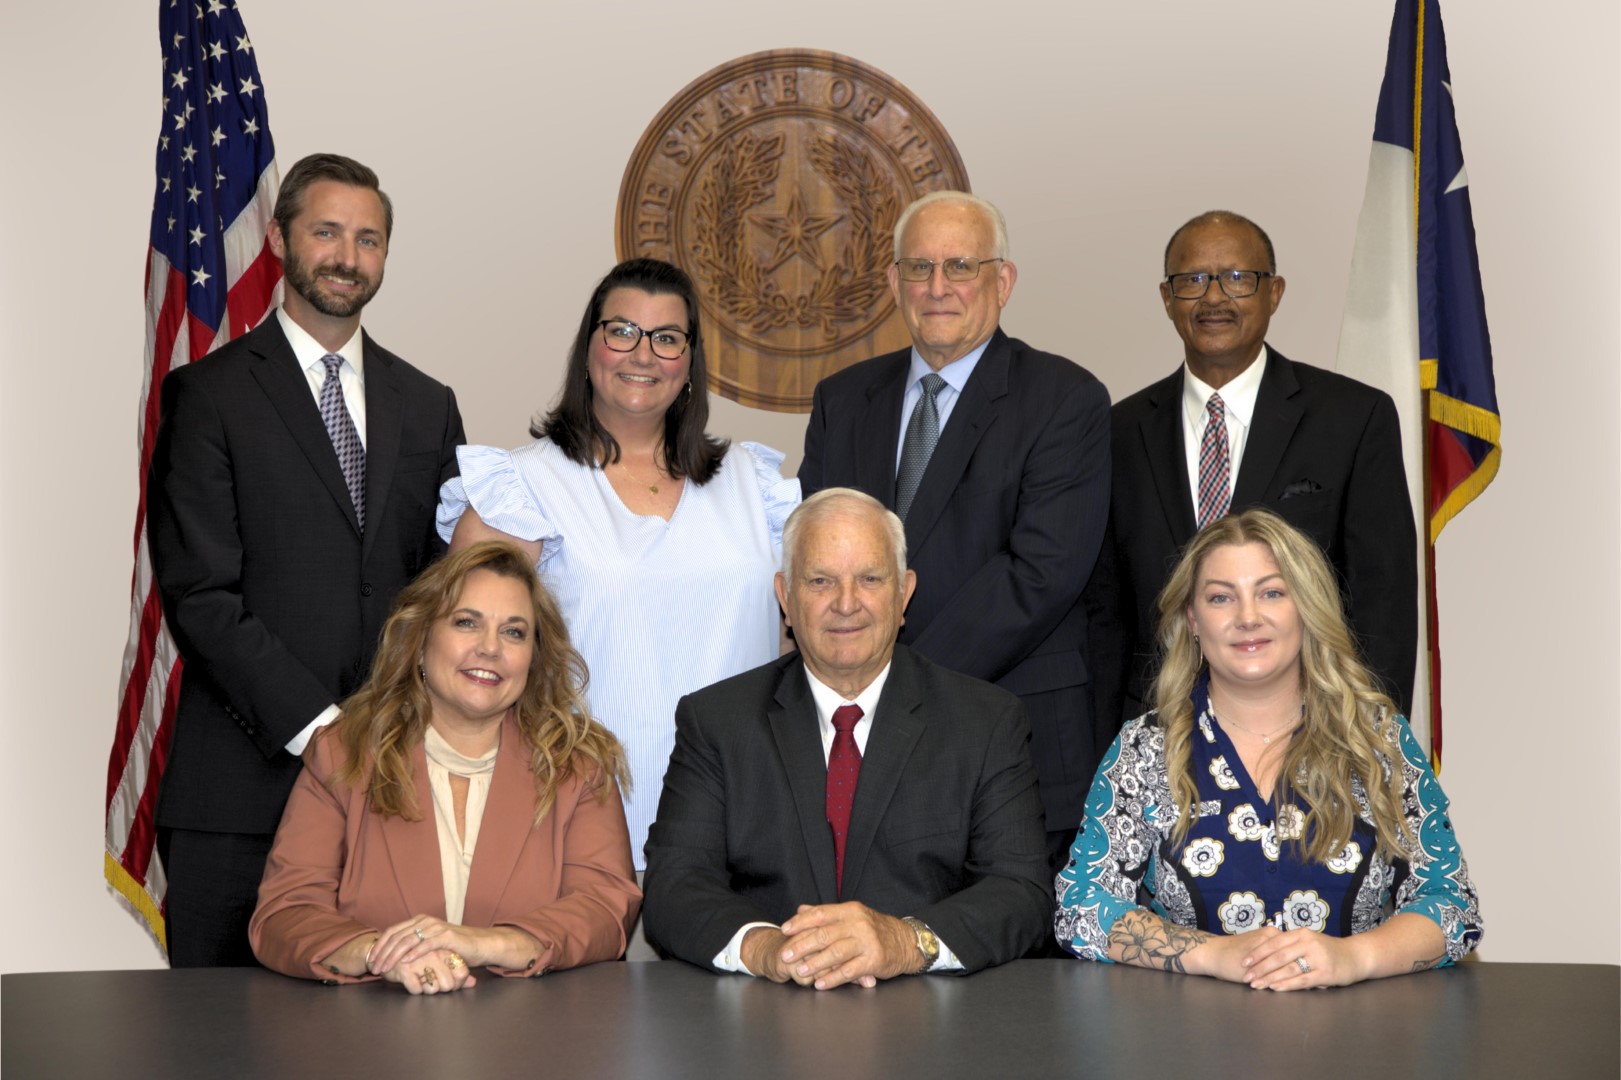 Mayor and Council group photo - Left to right - back row: Clint Kolby, Leah Cook, Dr. Paul LaRoche III, Albert Wright, front row: Adonna Saunders, Atwood Kenjura, Shannan Canales